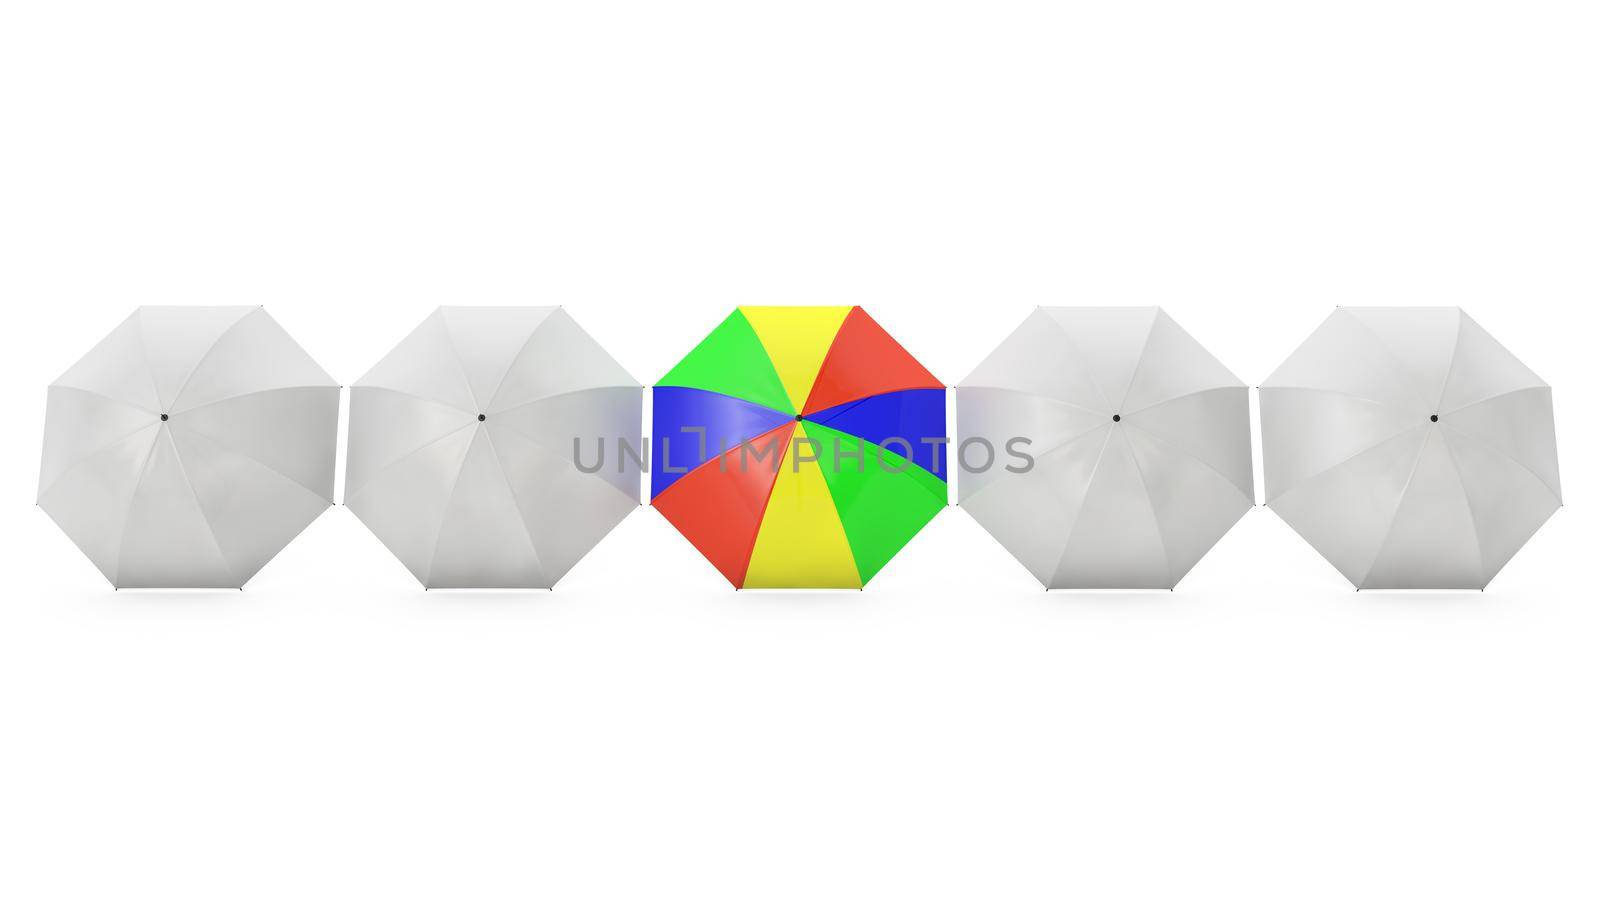 five umbrellas one of which is multi-colored on a white background